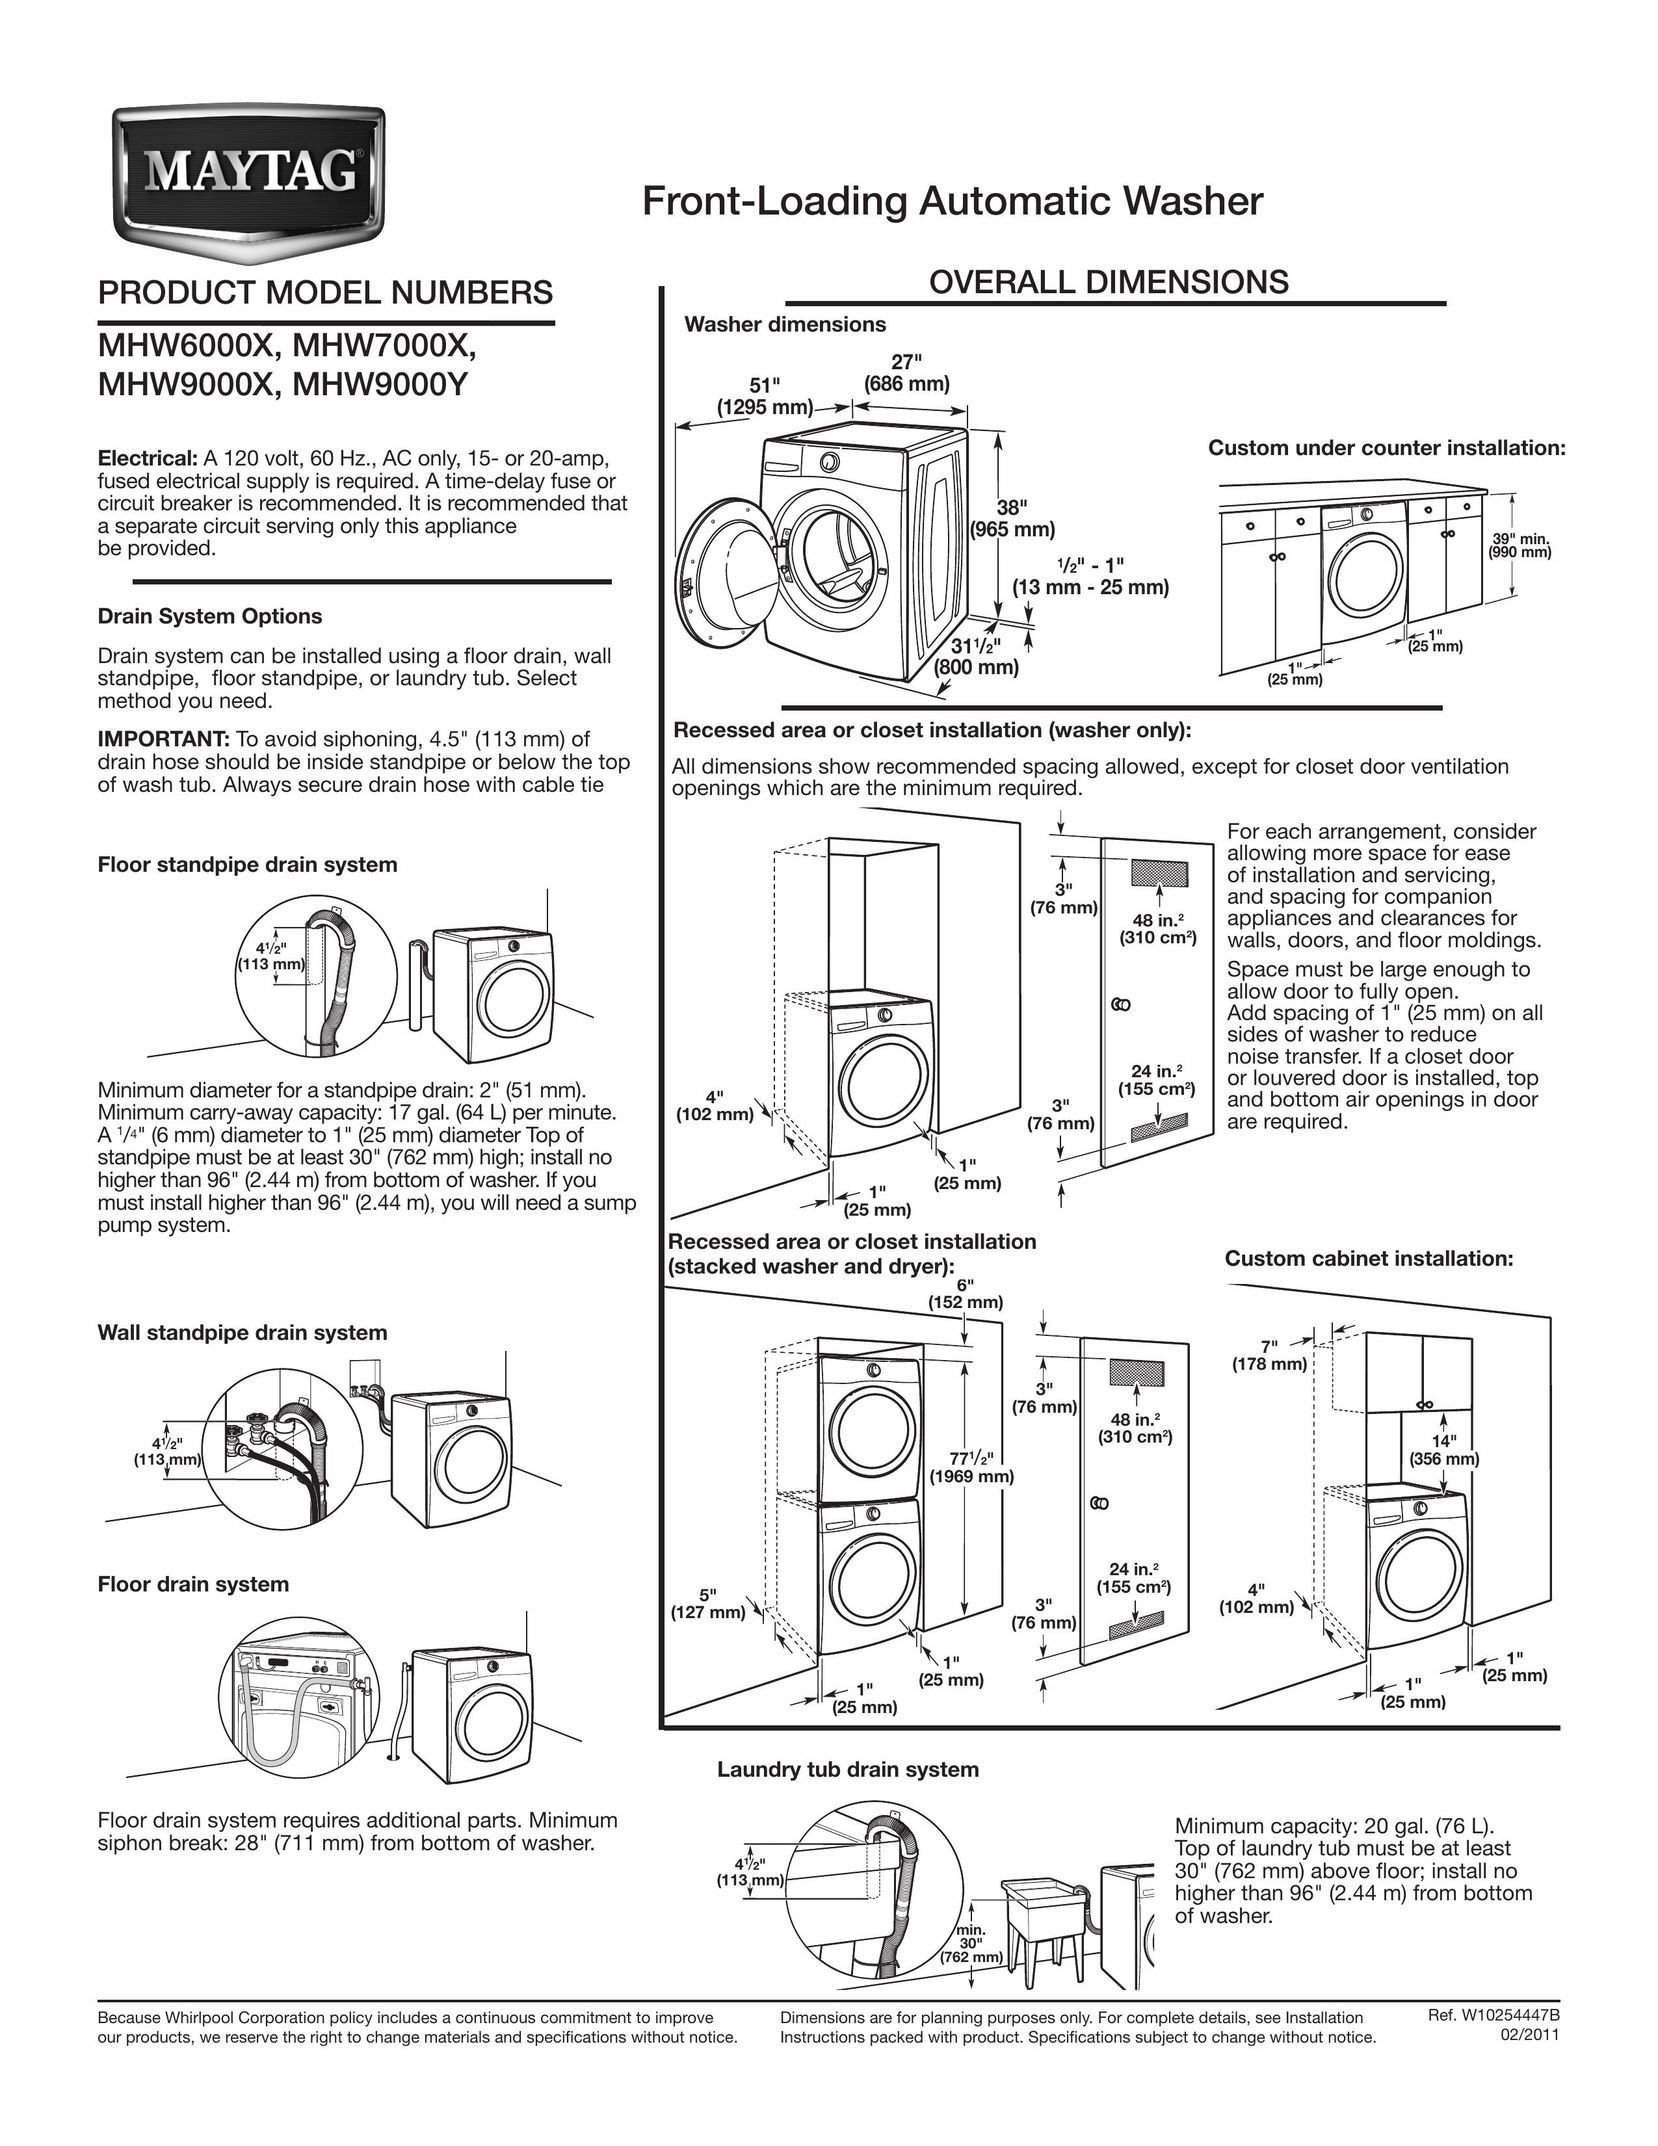 Maytag MHW9000X Ice Maker User Manual